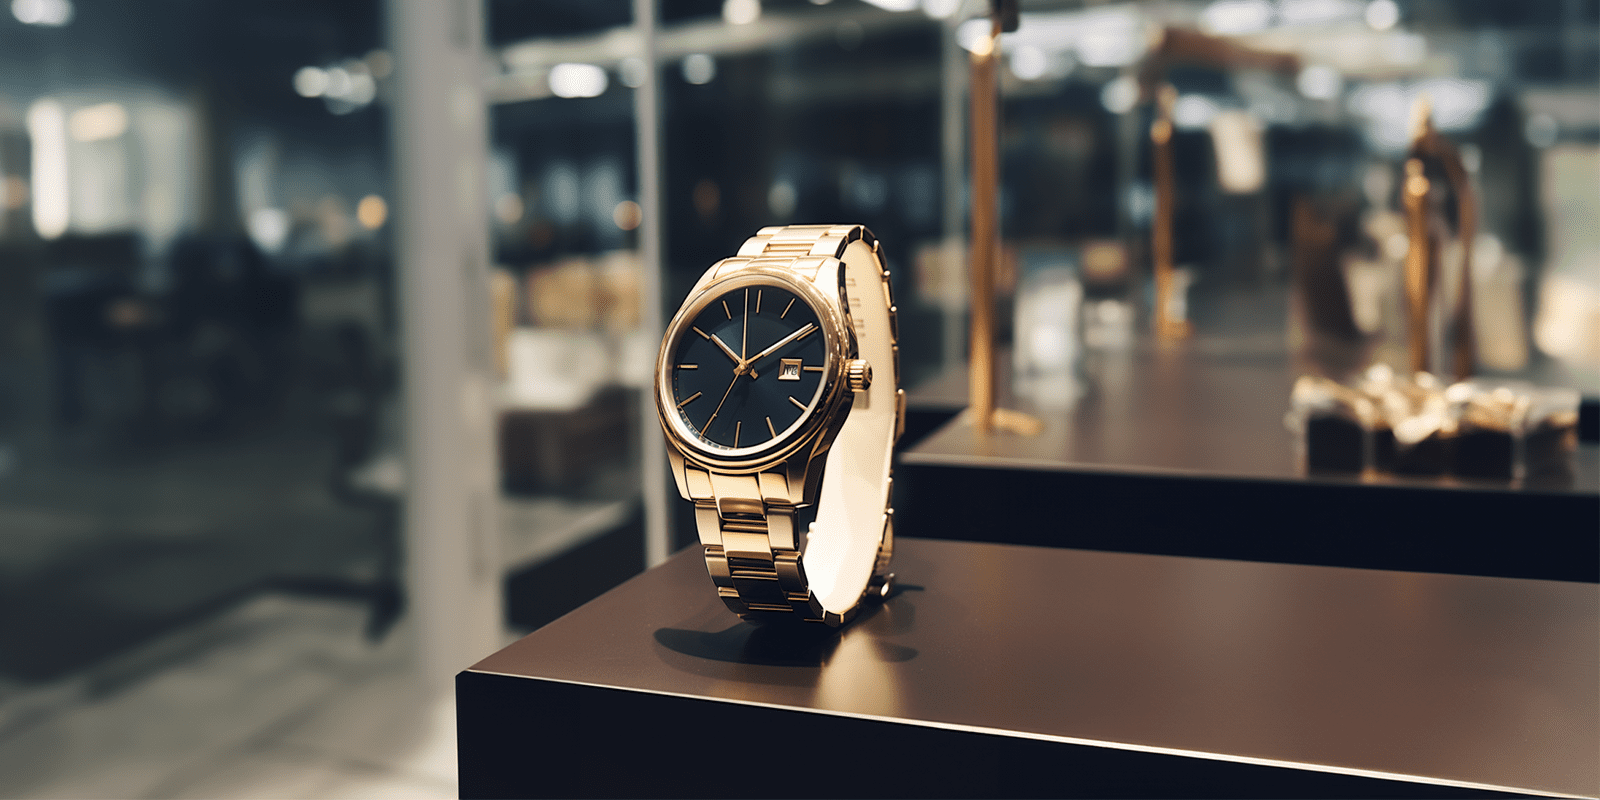 Feature Image of luxury watch on display at watch repair shop